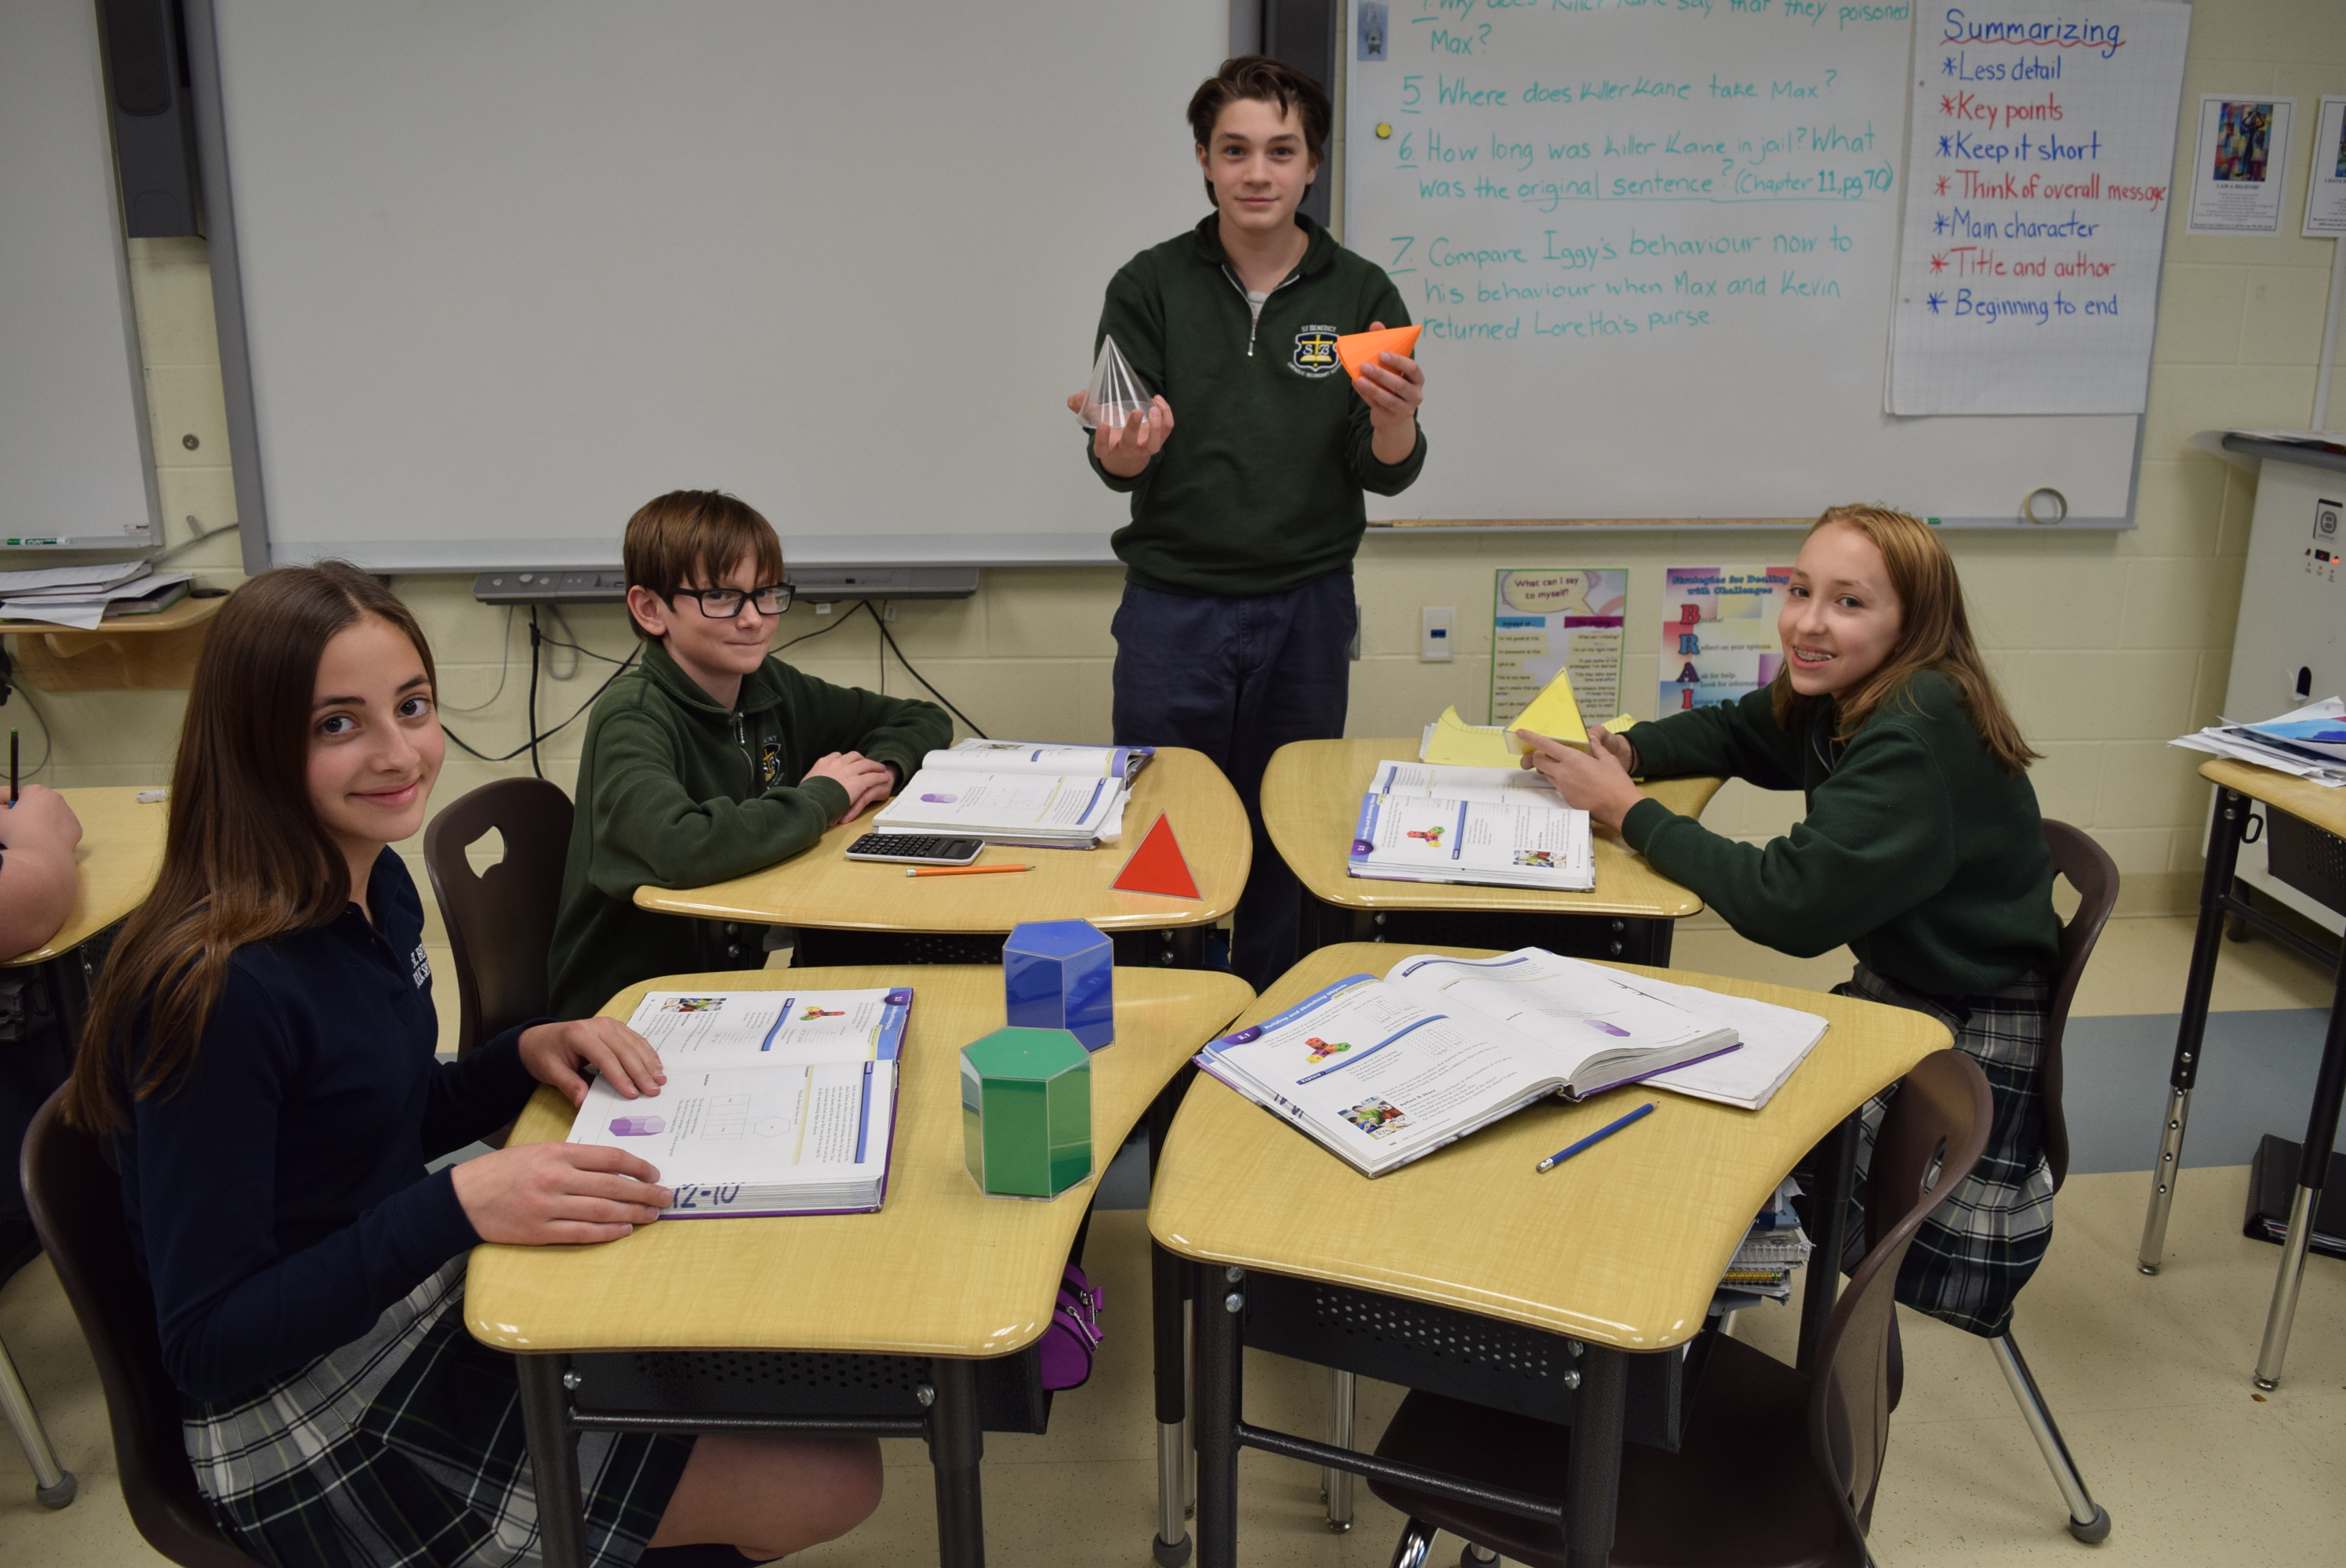 Two male students and two female students study geometrical shapes.